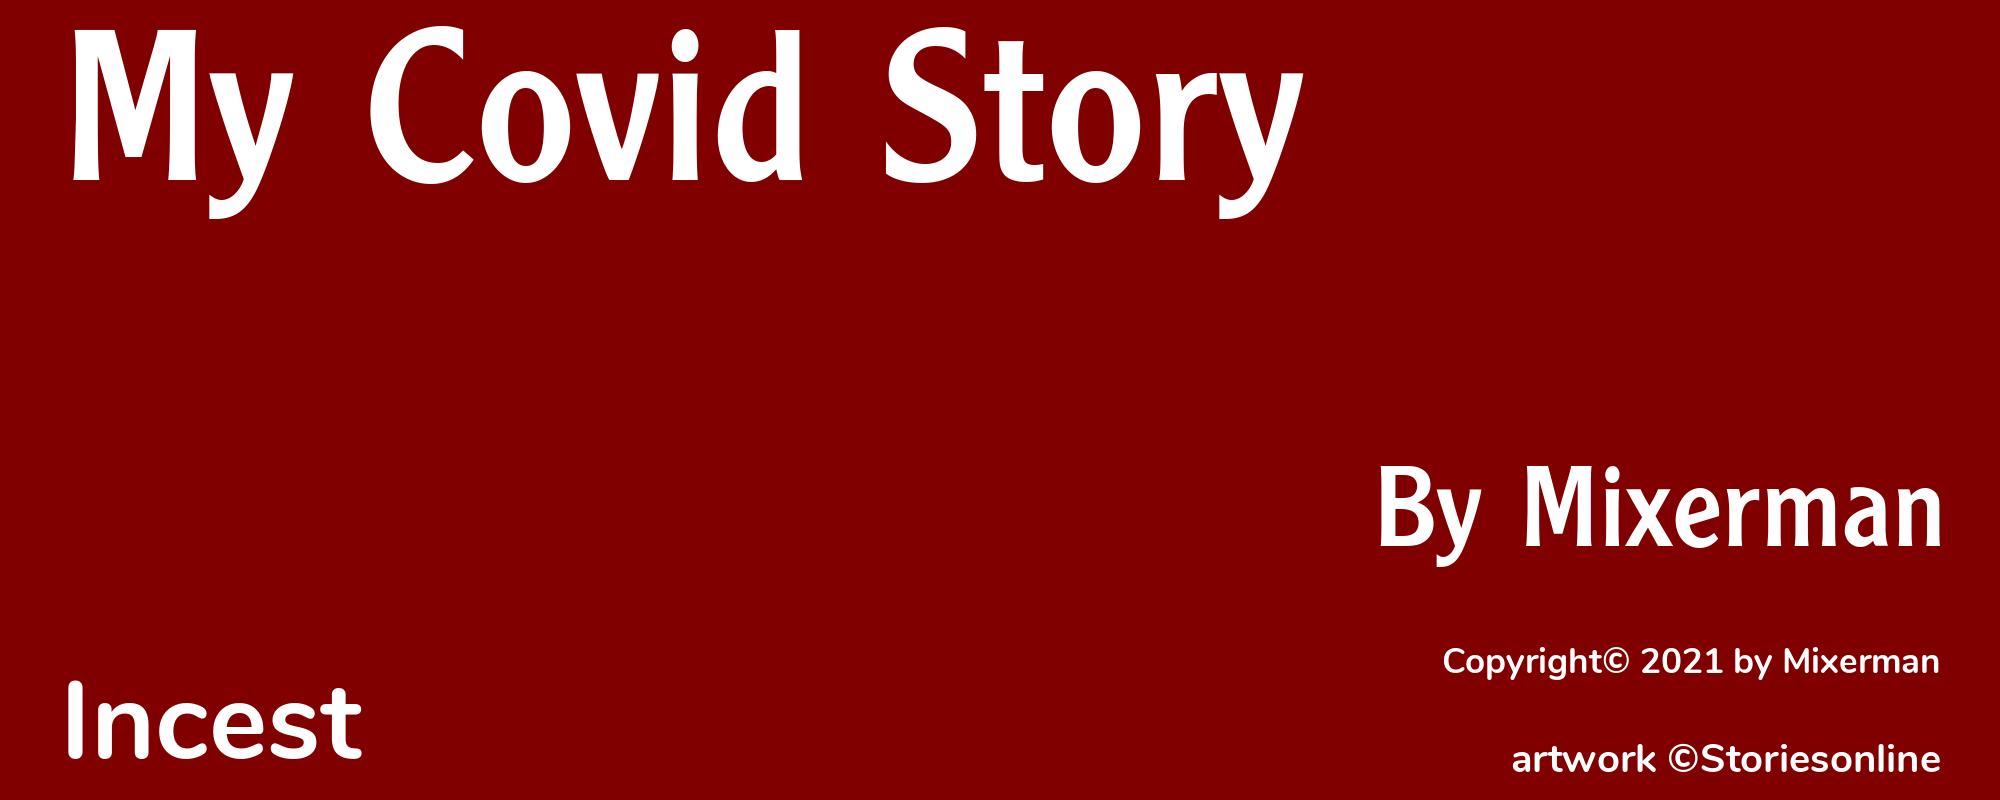 My Covid Story - Cover